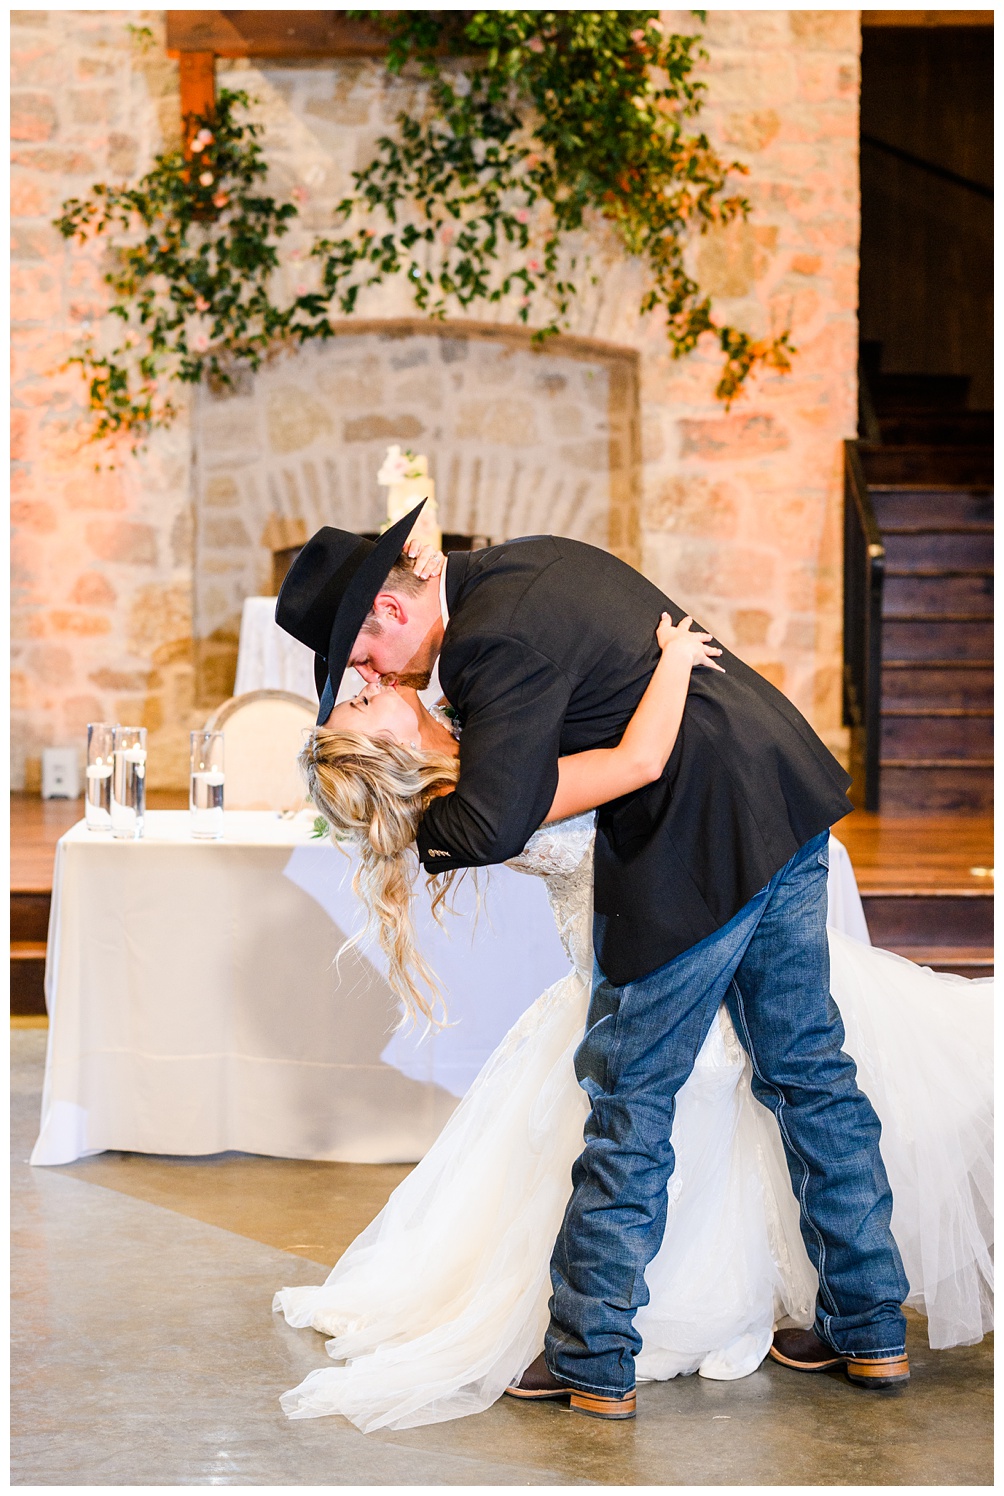 First dance as husband and wife at Hidden River Ranch